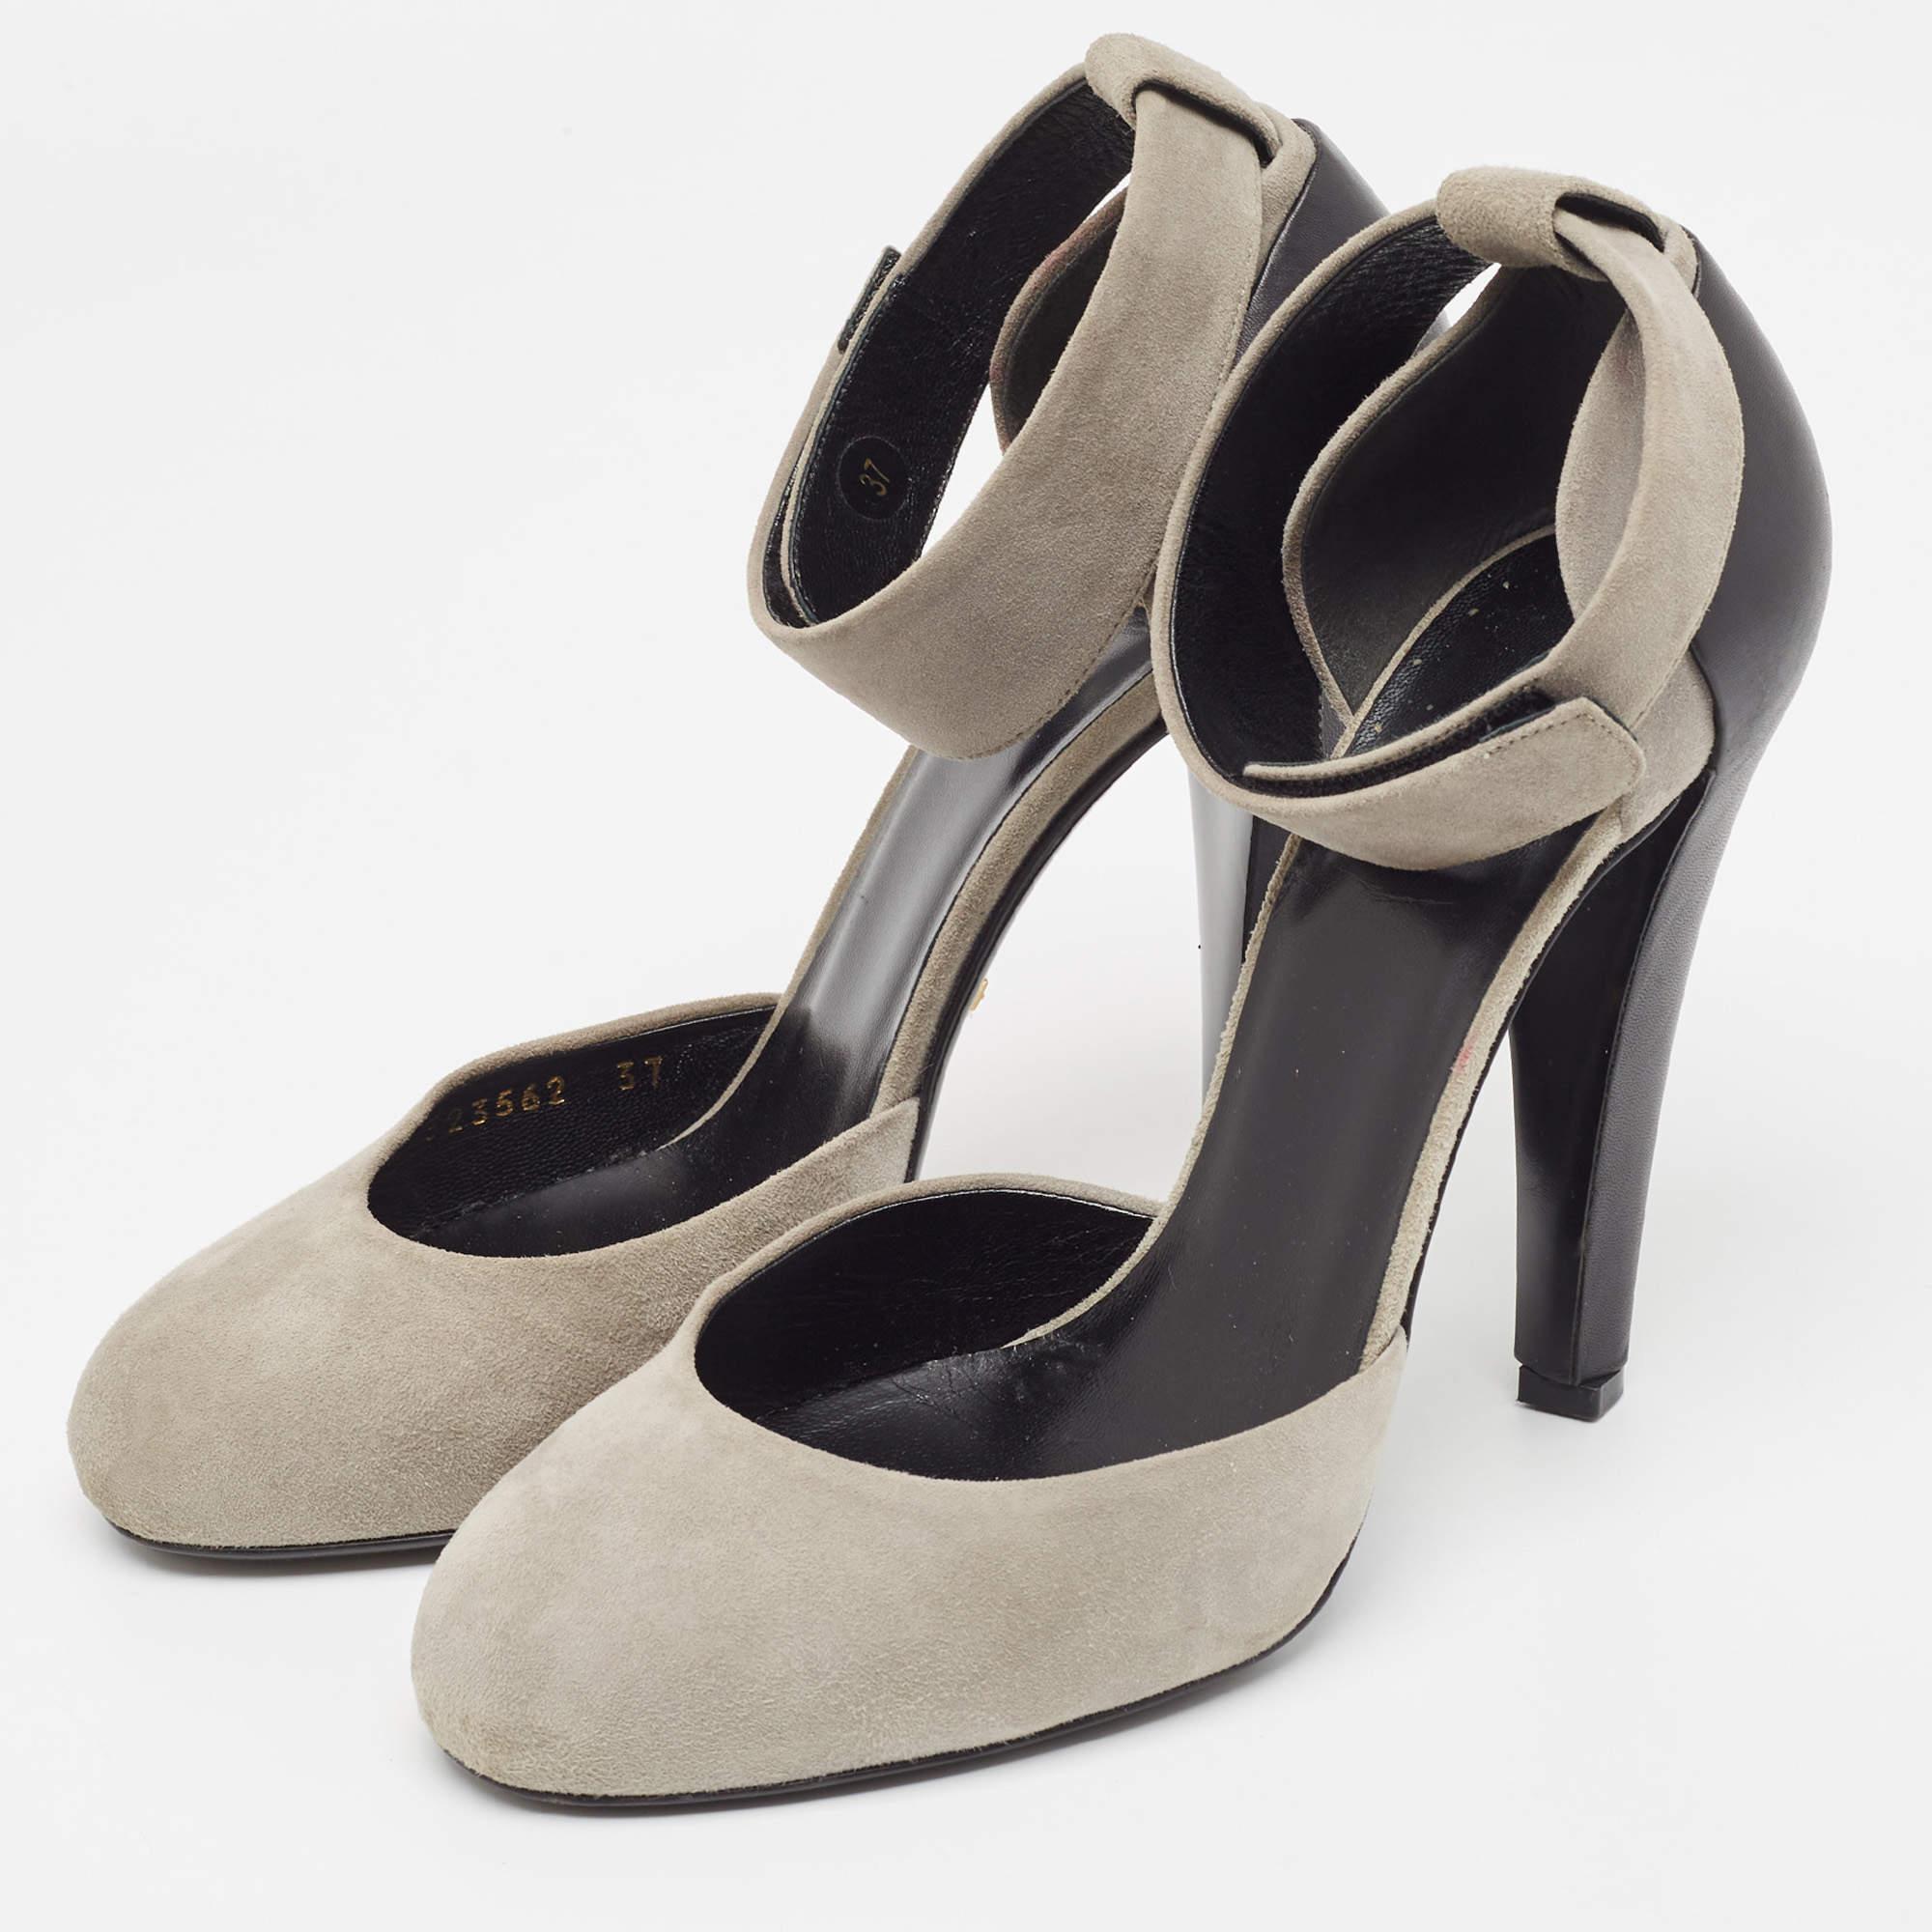 Gucci Grey/Black Suede Leather Ankle Cuff Pumps Size 37 For Sale 4